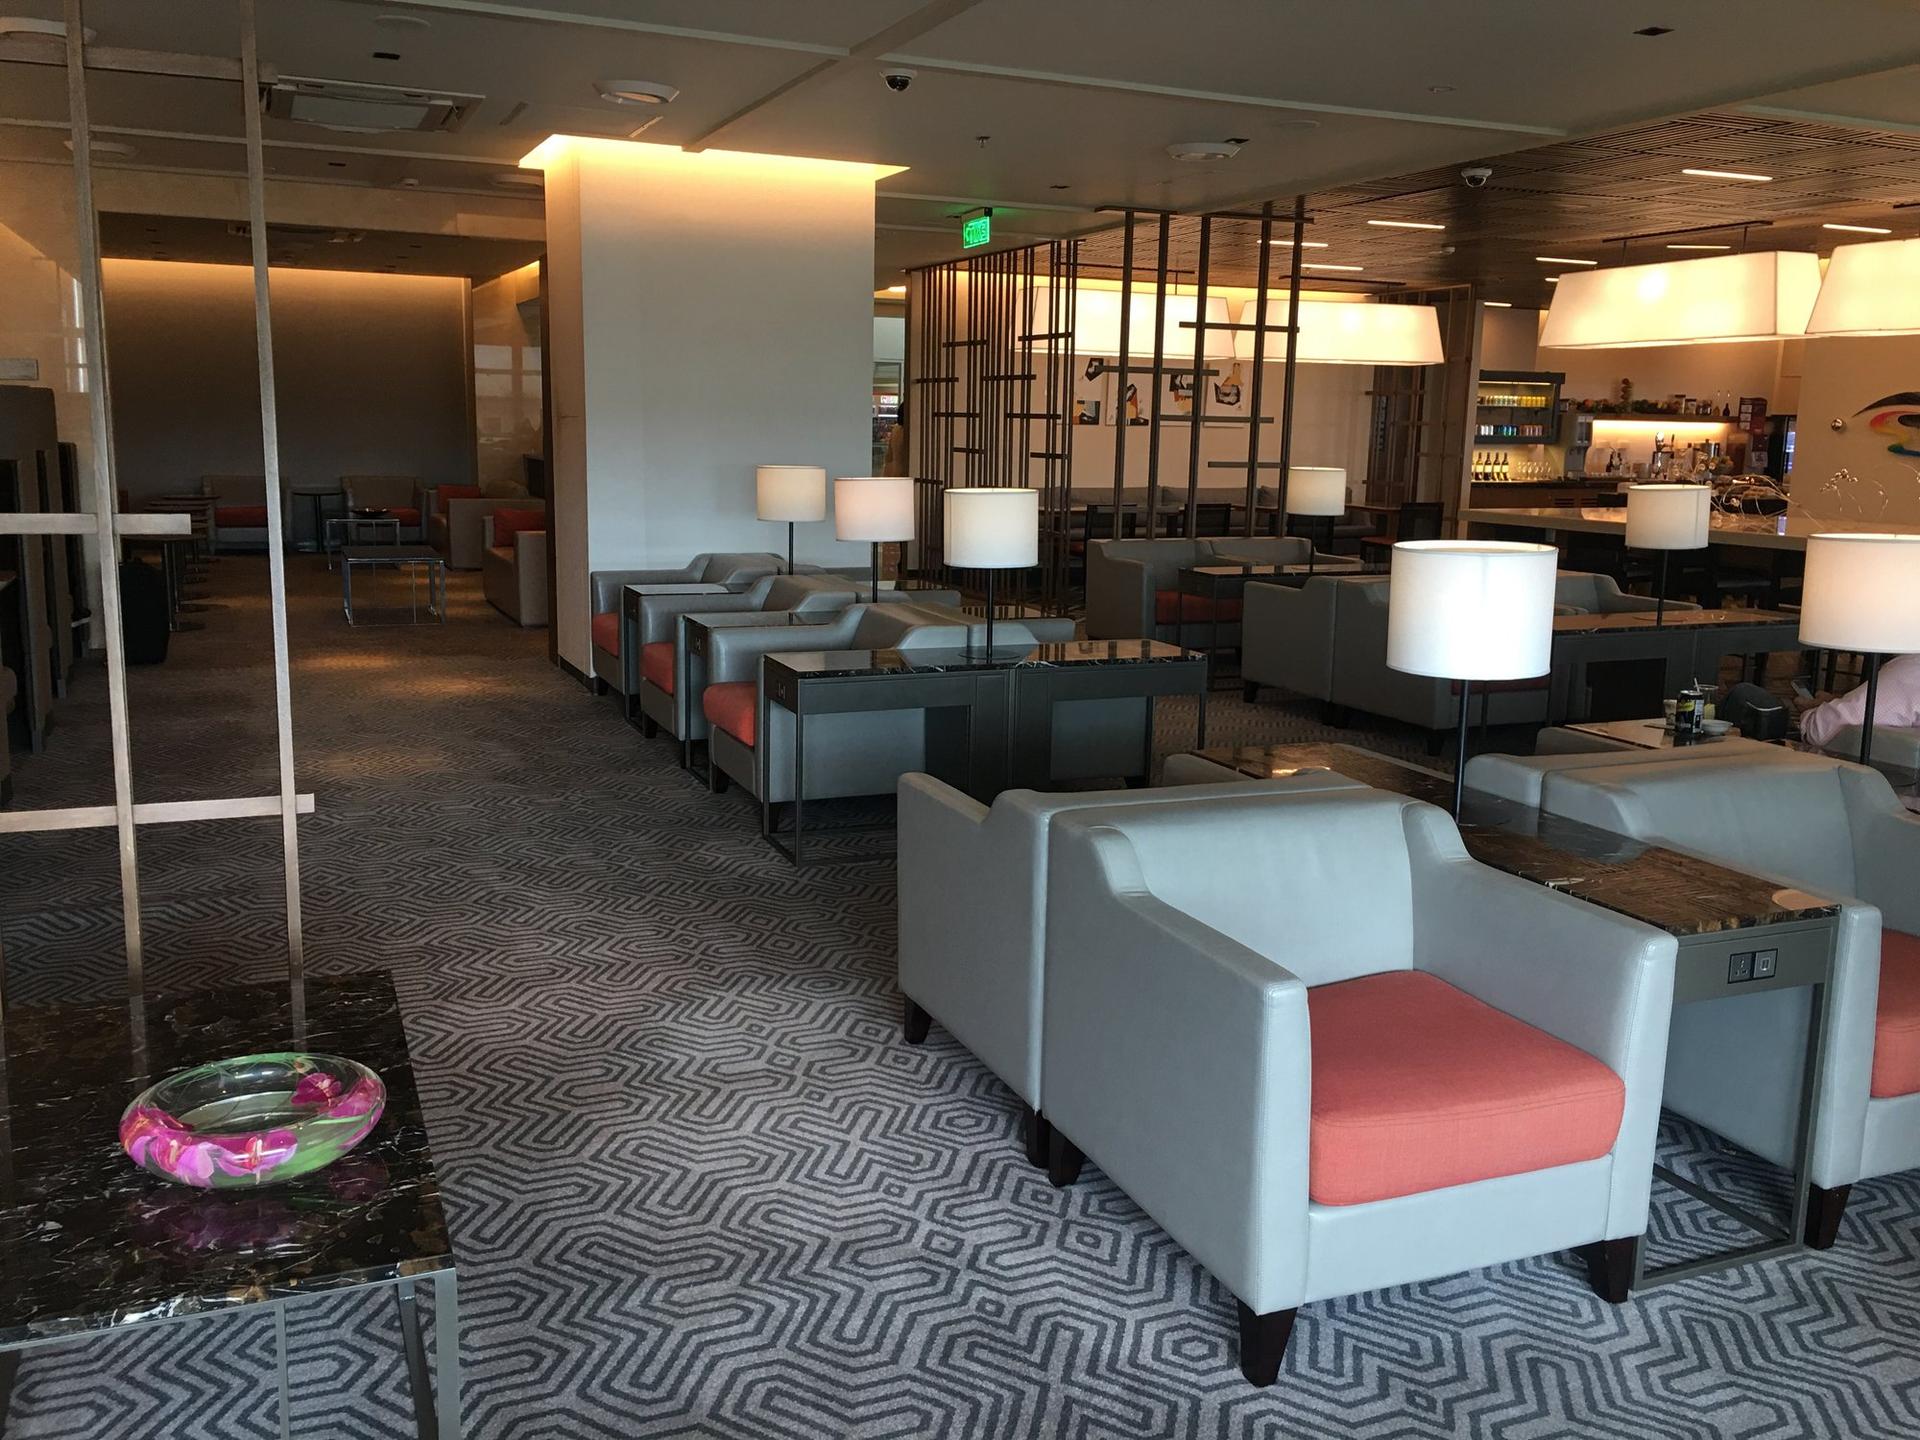 Singapore Airlines SilverKris Lounge image 7 of 12